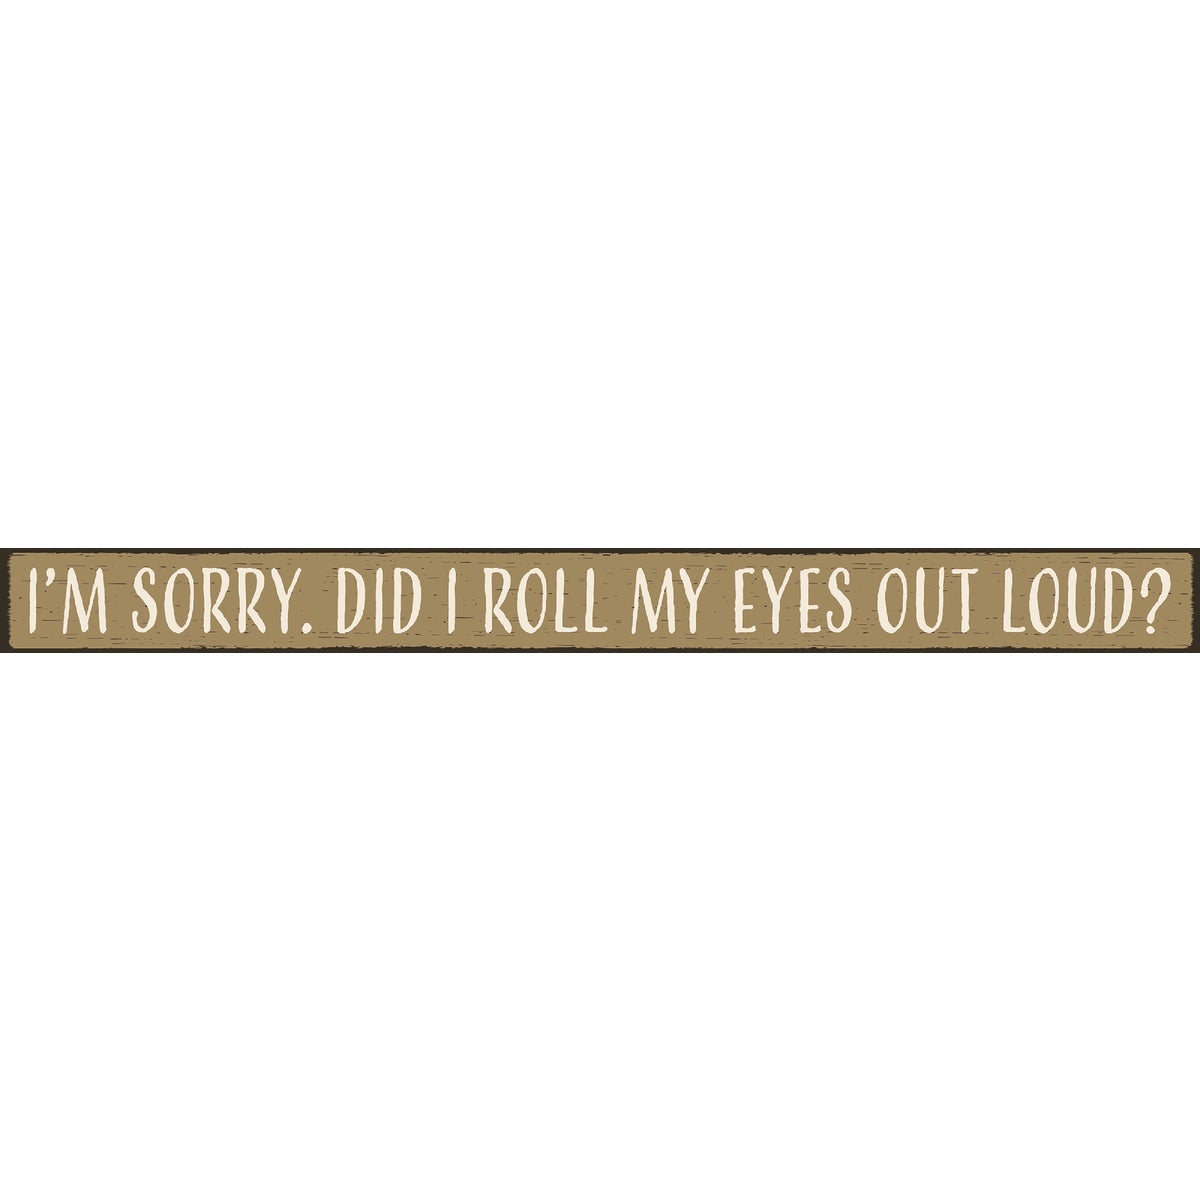 Skinnies My Word! 73717 Skinnies 1.5 In. x 16 In. I'm Sorry, Did I Roll My Eyes Out Loud Wood Sign 73717 Pack of 3